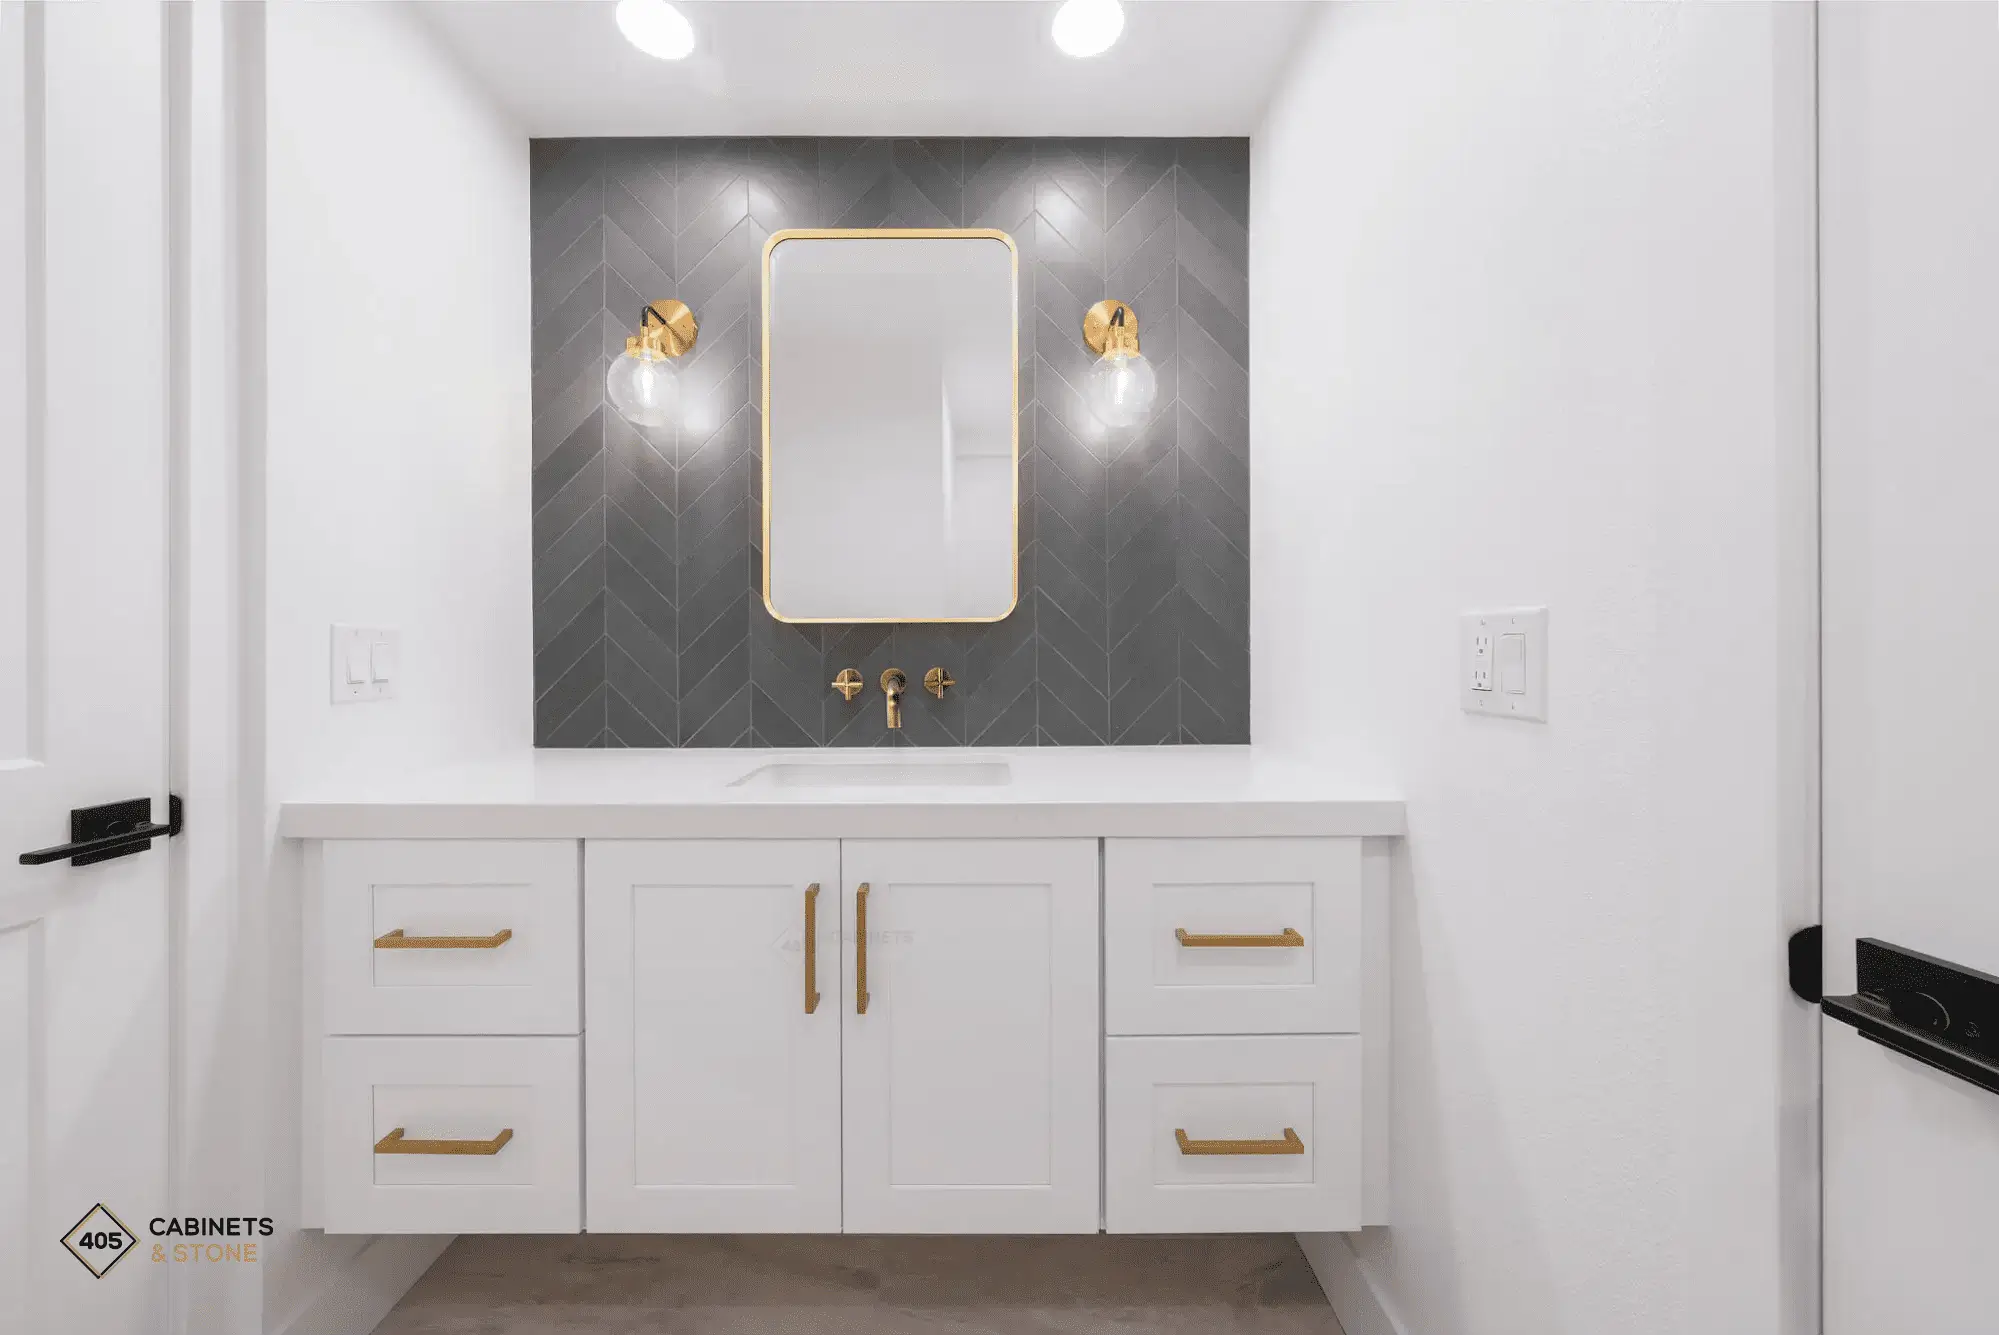 6 Expert Tips to Save Your Bathroom Vanity Installation Cost